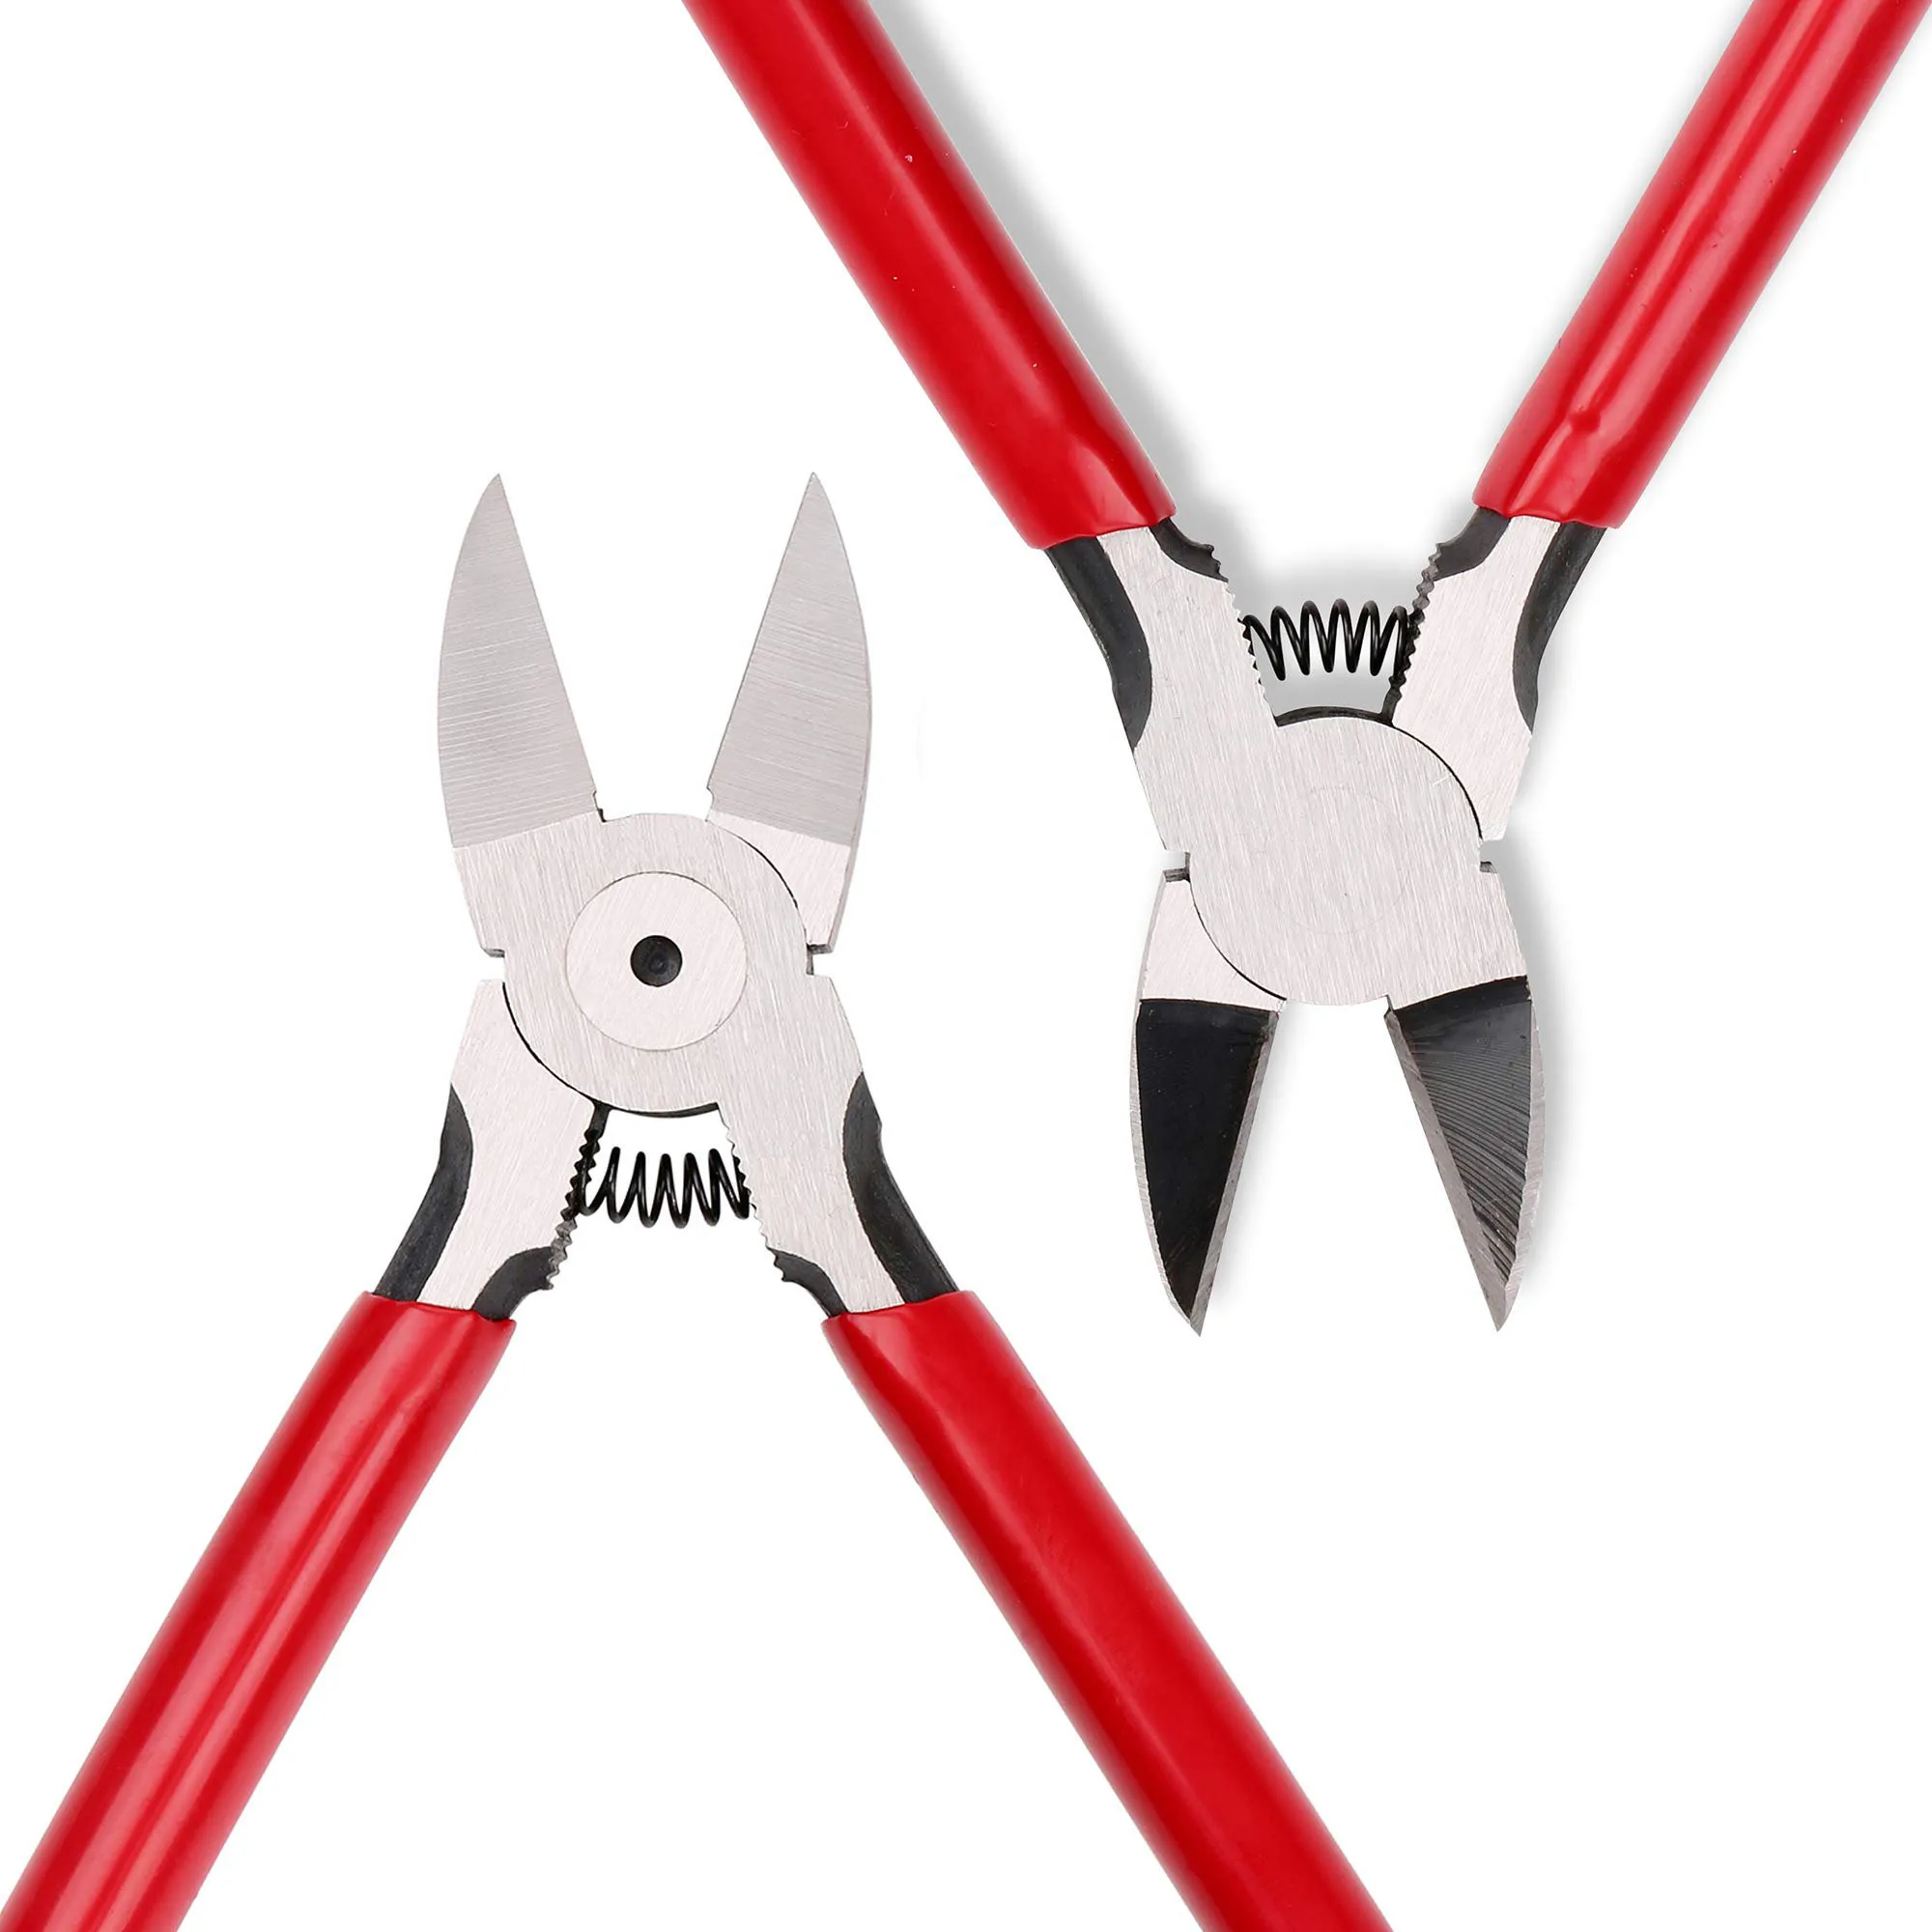 good price high quality in stock precision side cutter heavy duty flush cutting pliers tool diagonal cutting pliers